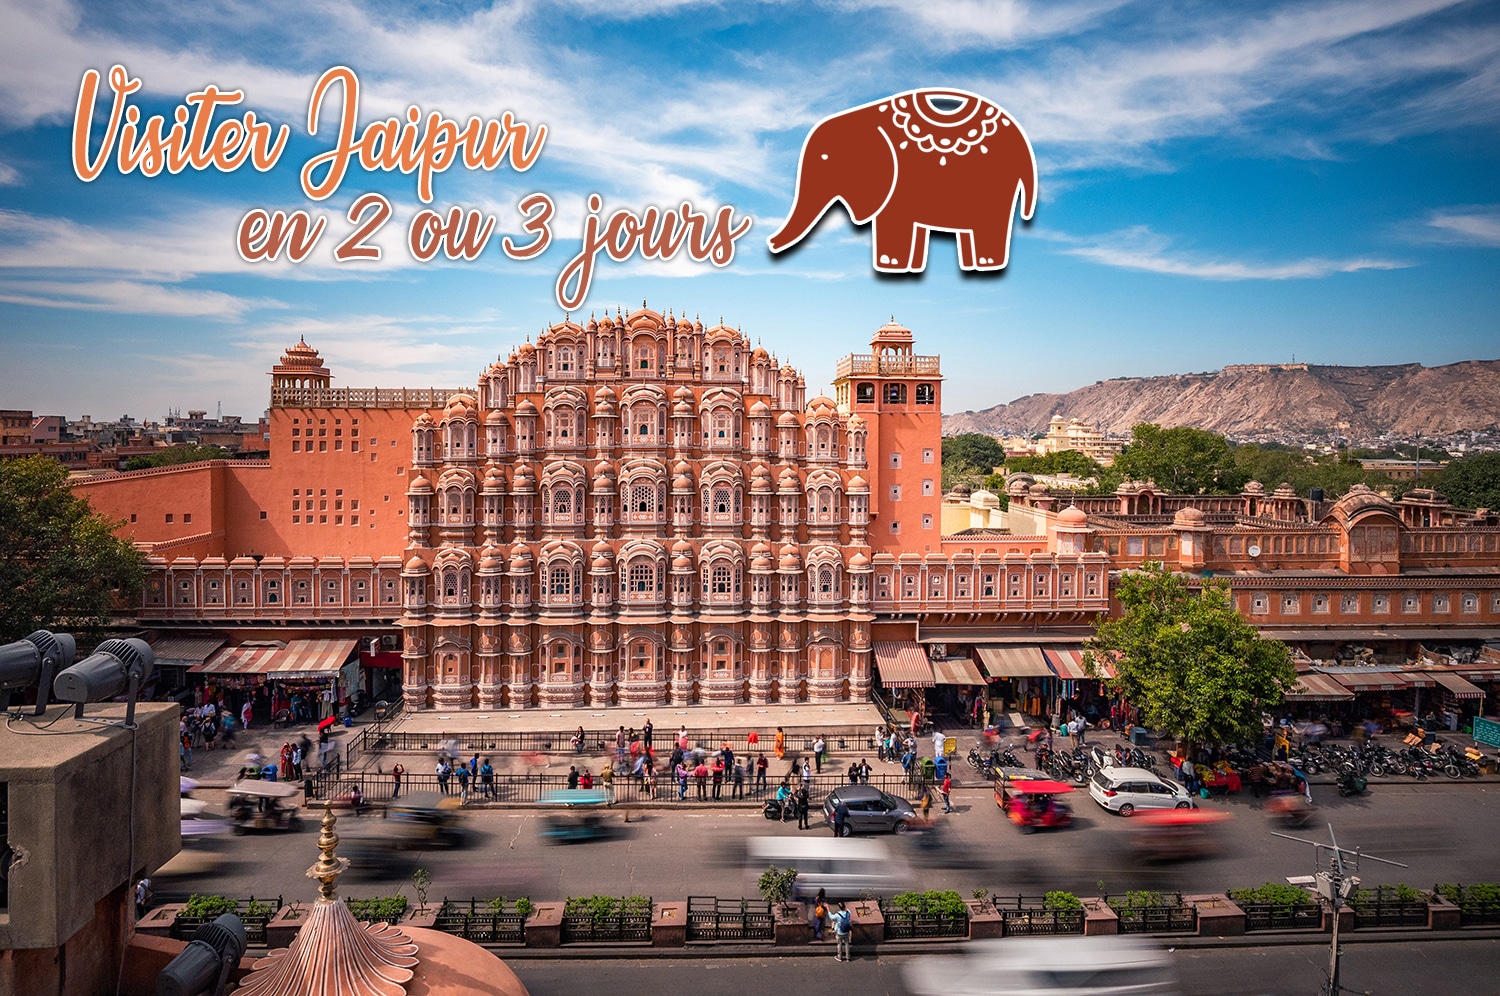 You are currently viewing Conseils pour visiter Jaipur en 2 ou 3 jours